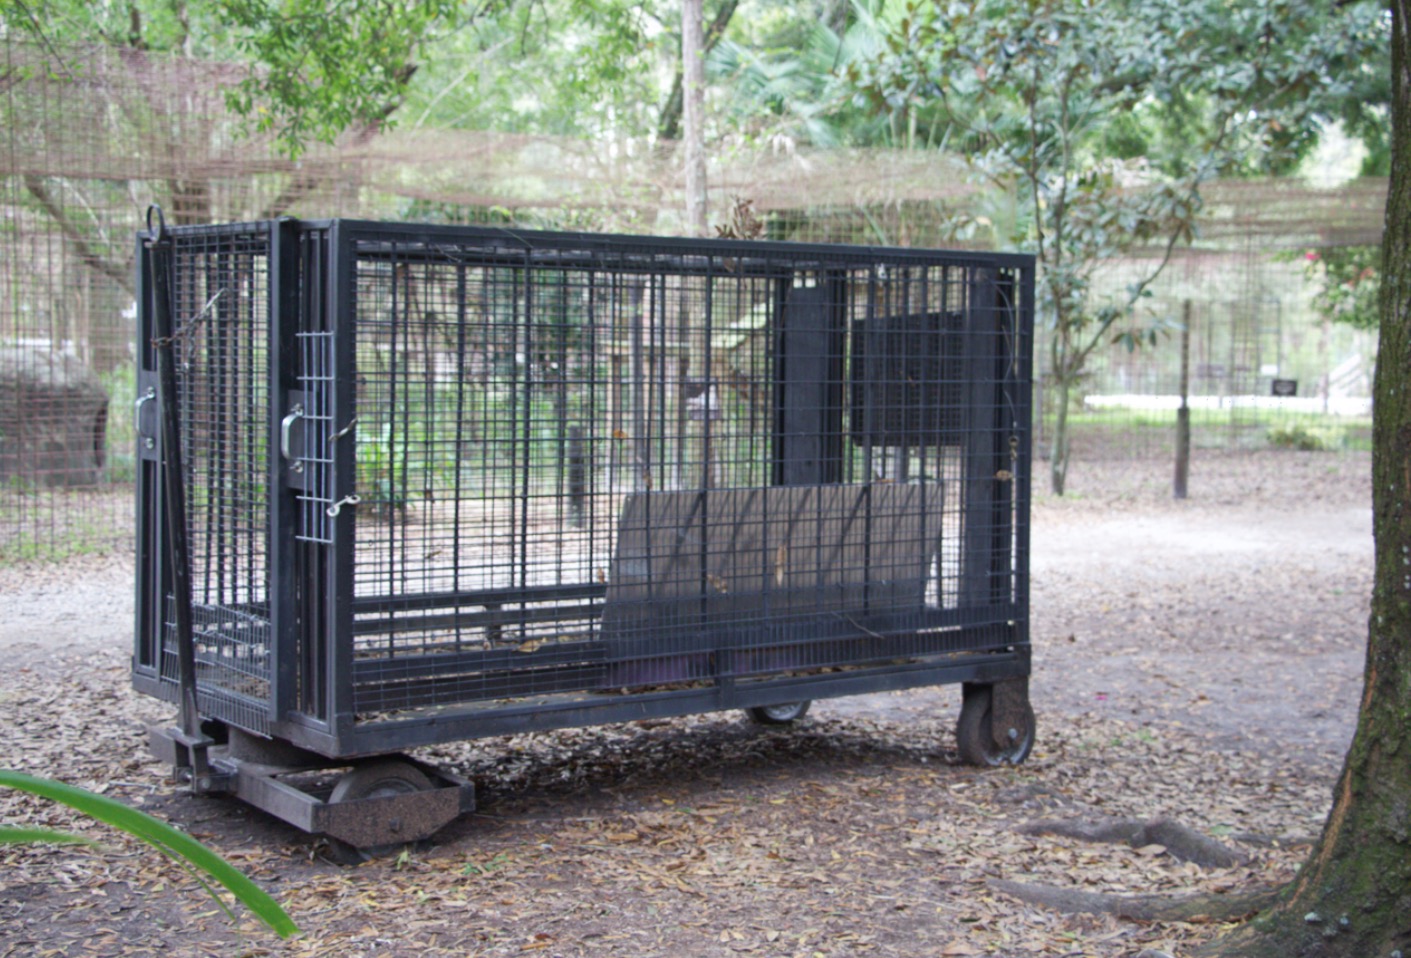 Caged animals. External Cages/Enclosures.